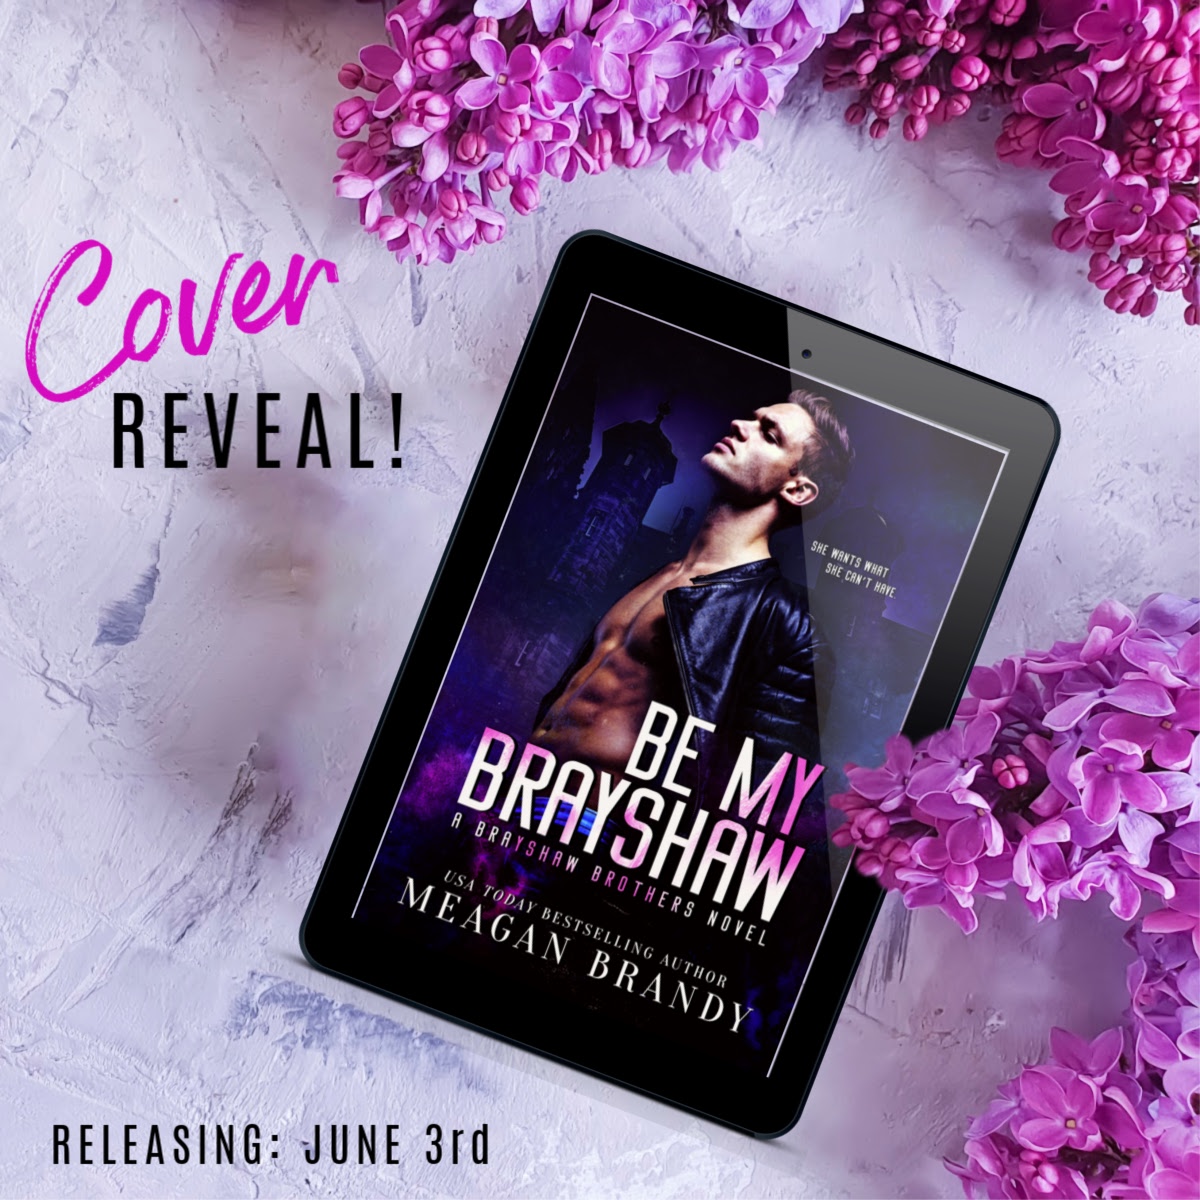 Be My Brayshaw by #MeaganBrandy [Cover Reveal]